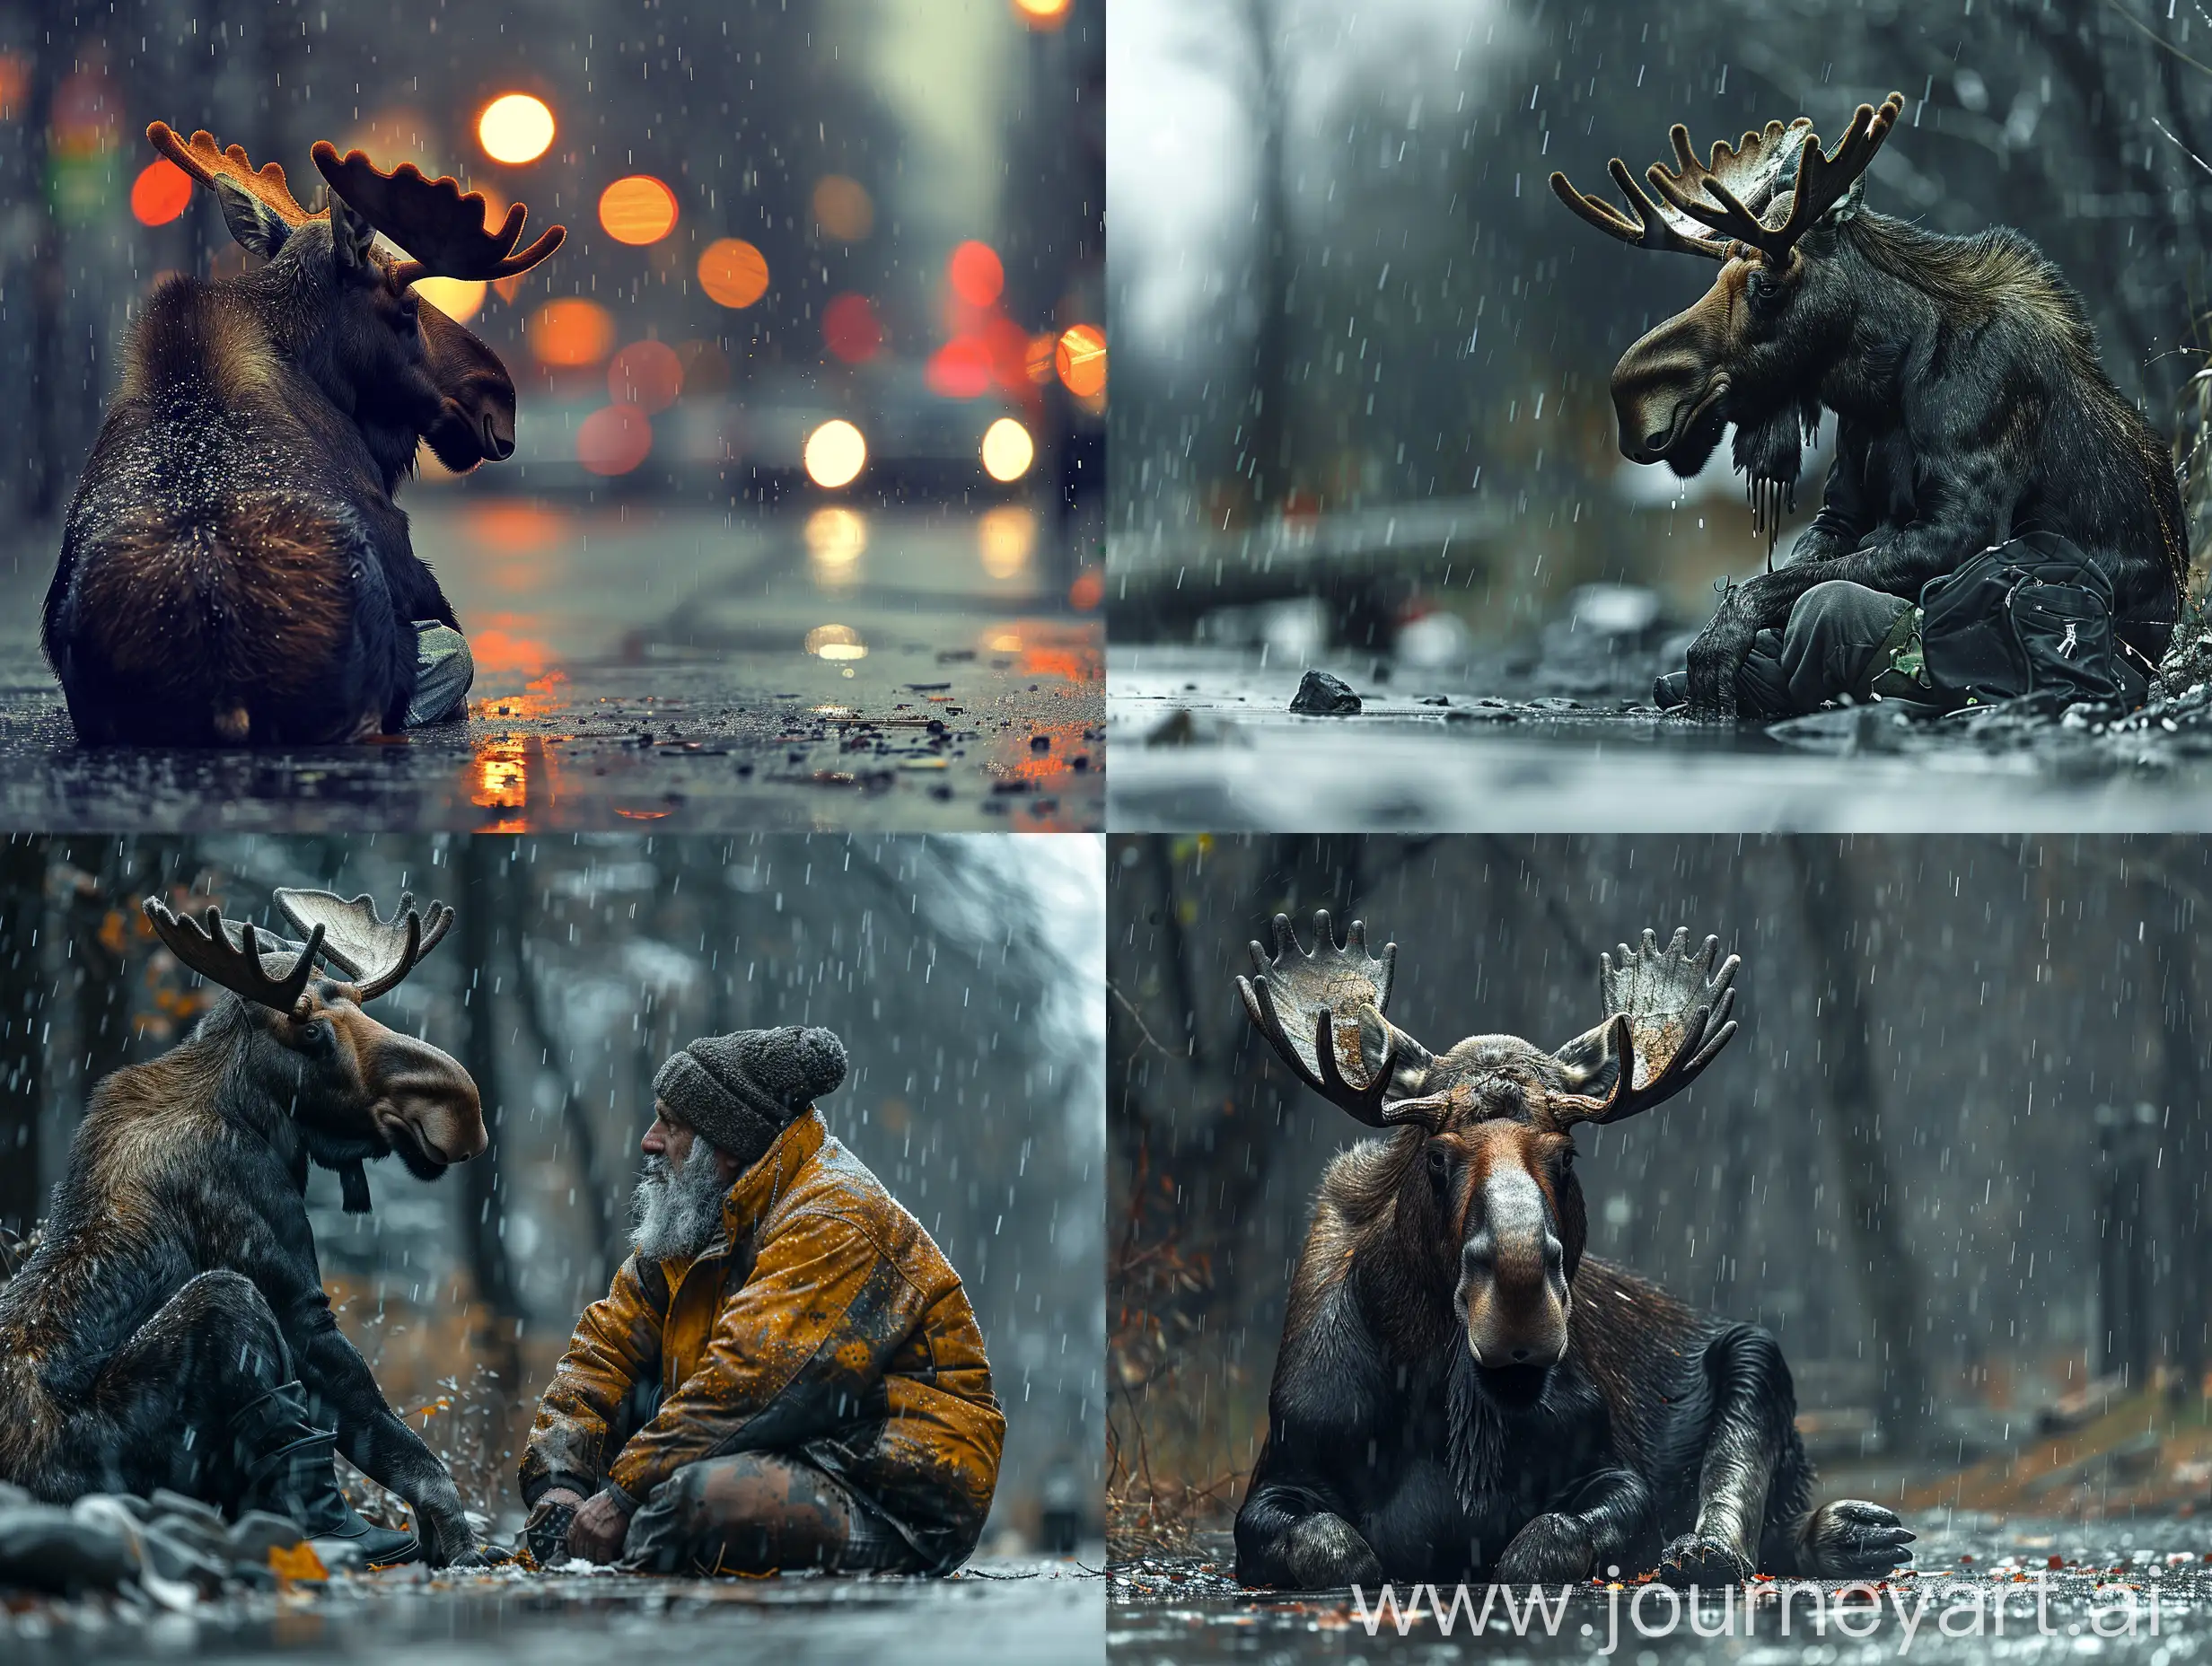 Lonely-Moose-Enduring-Rainy-Street-as-a-Symbol-of-Struggle